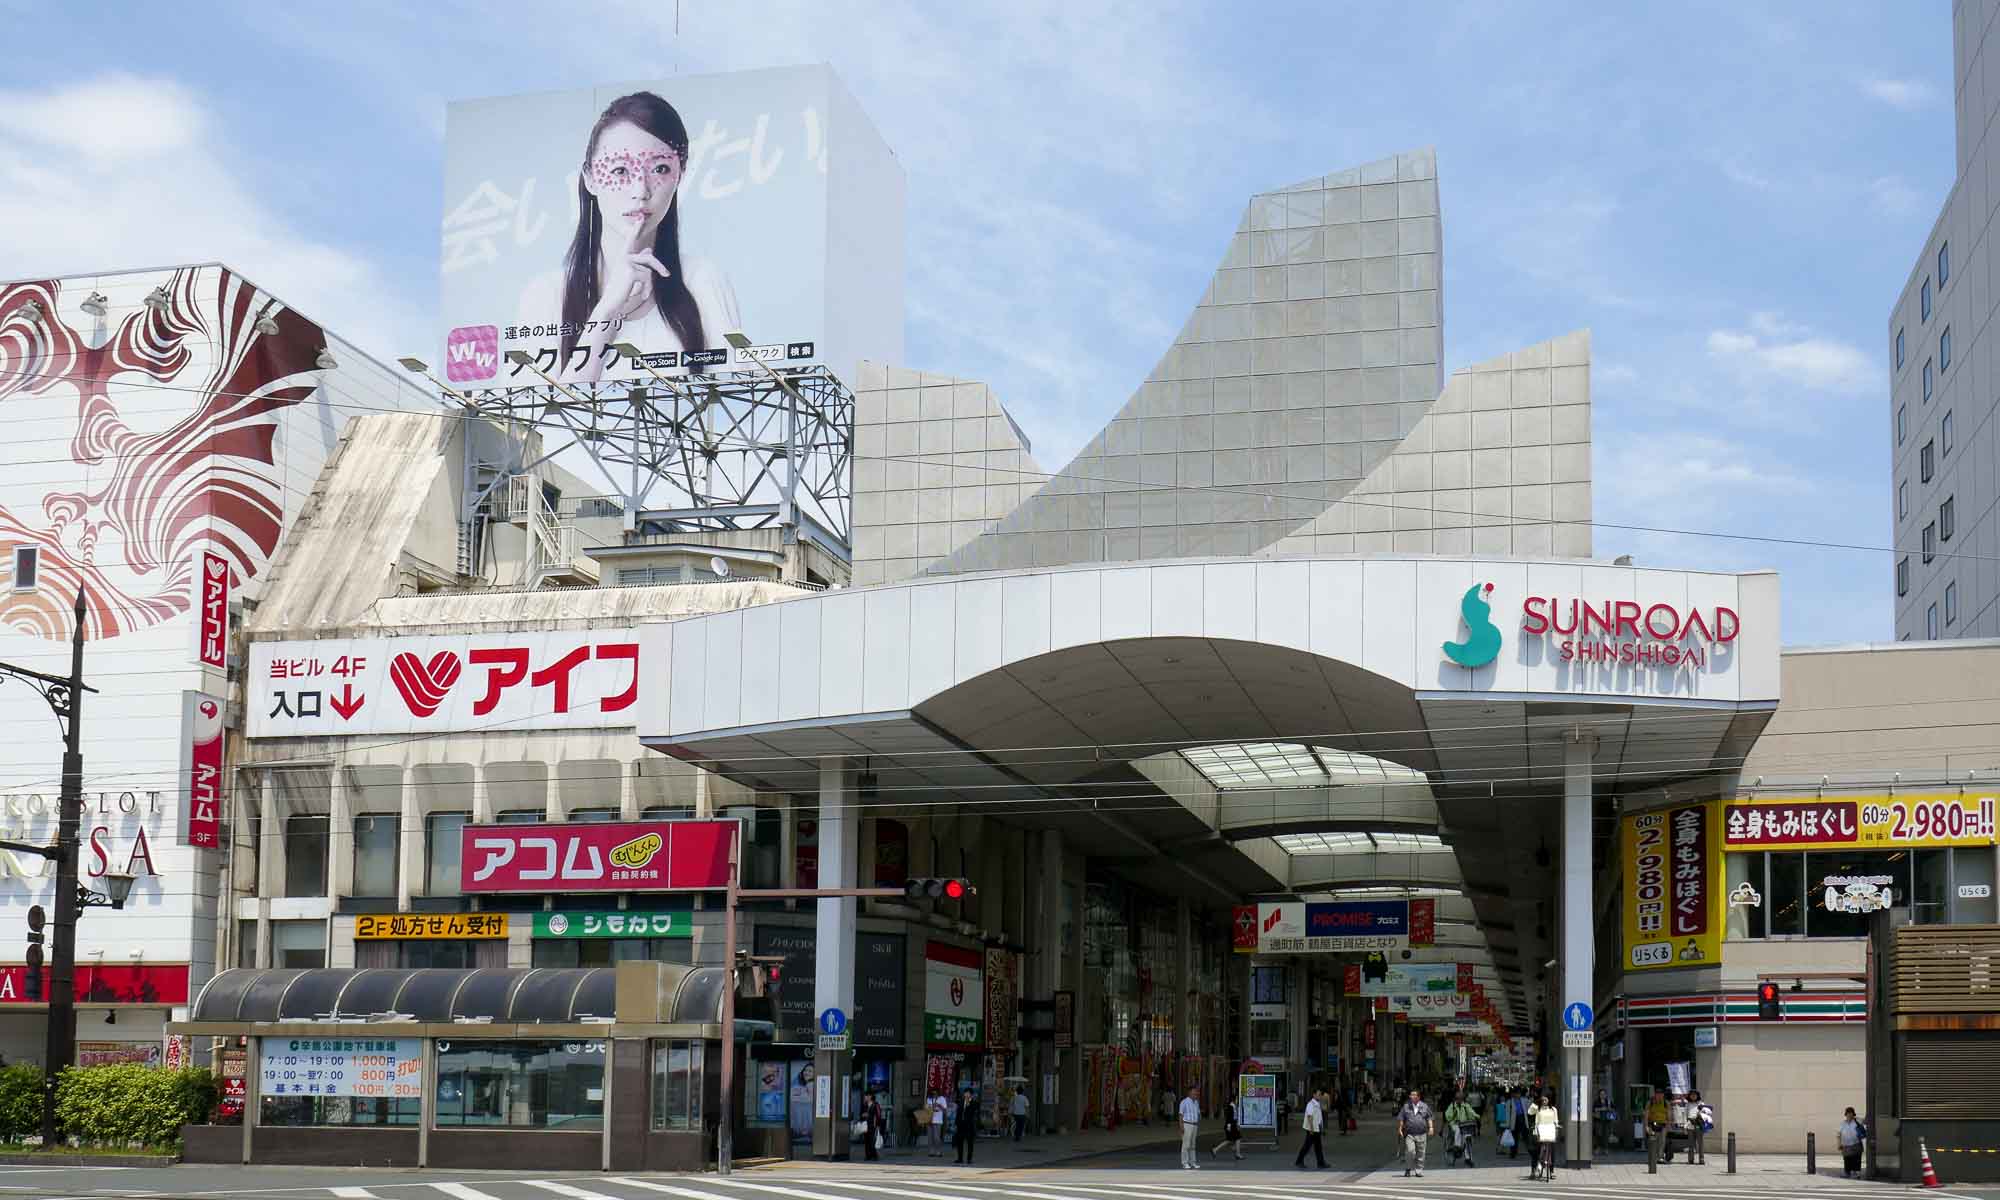 Shopping mall in Shinshigai area, close to our hotel